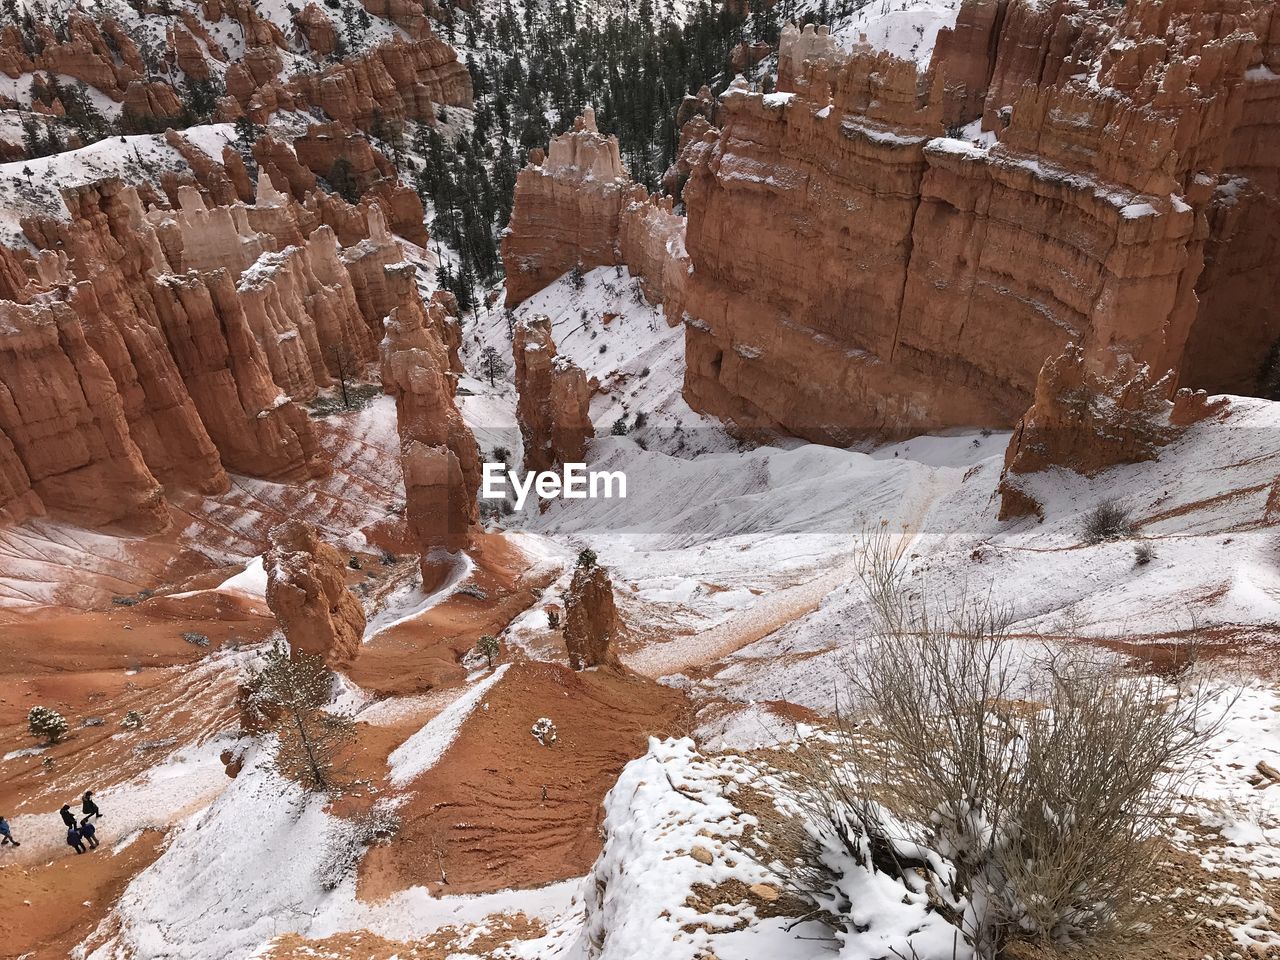 Rock formations in snow